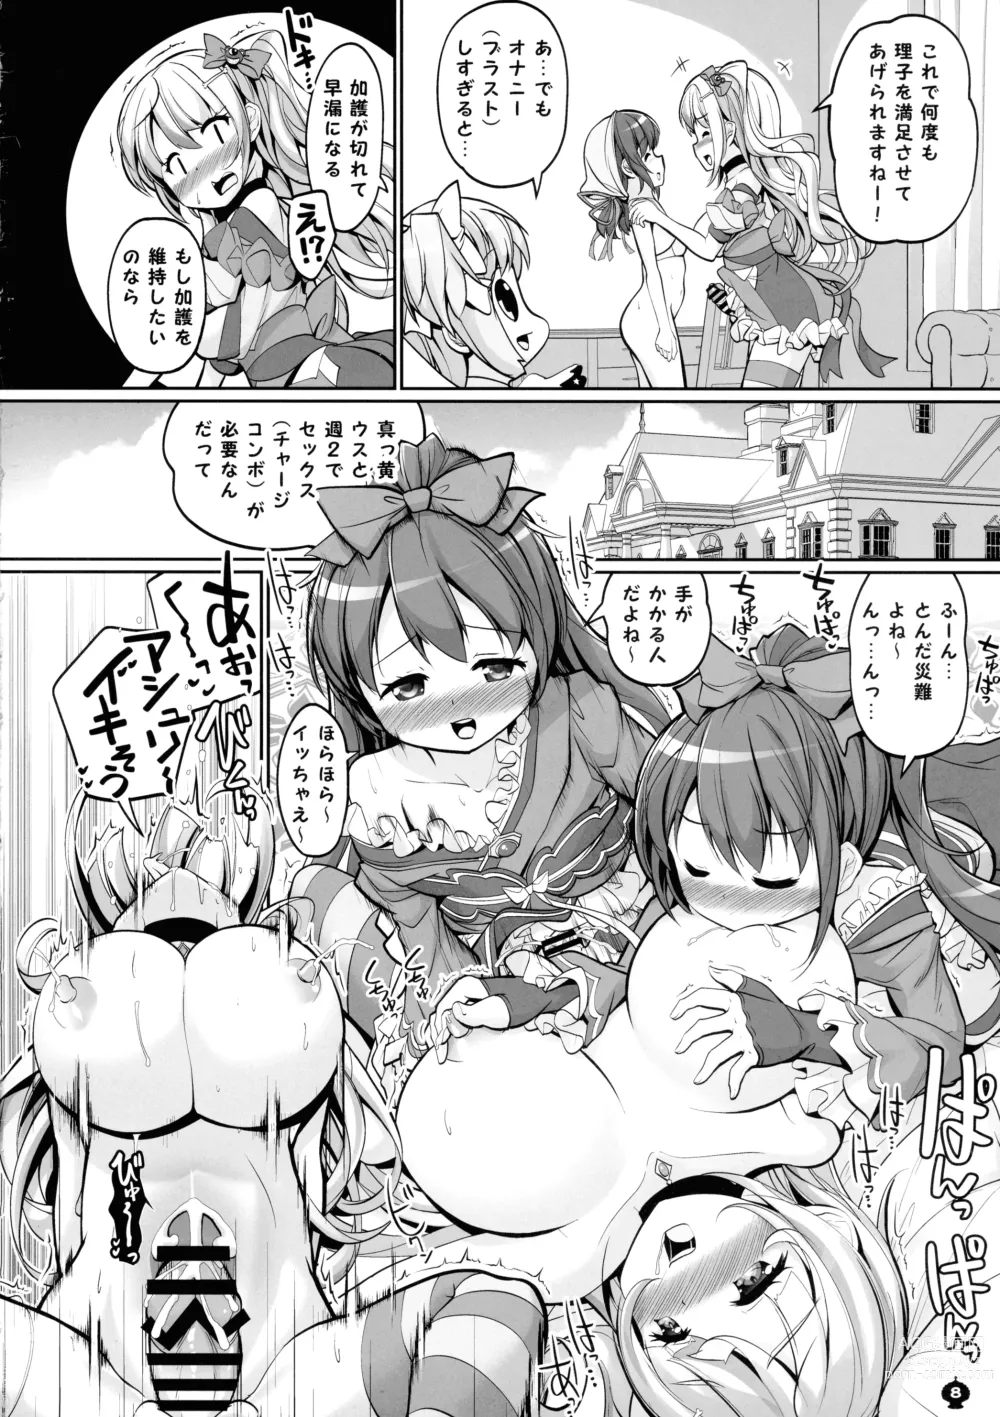 Page 8 of doujinshi Blast Super Chou Gorilla in HELL